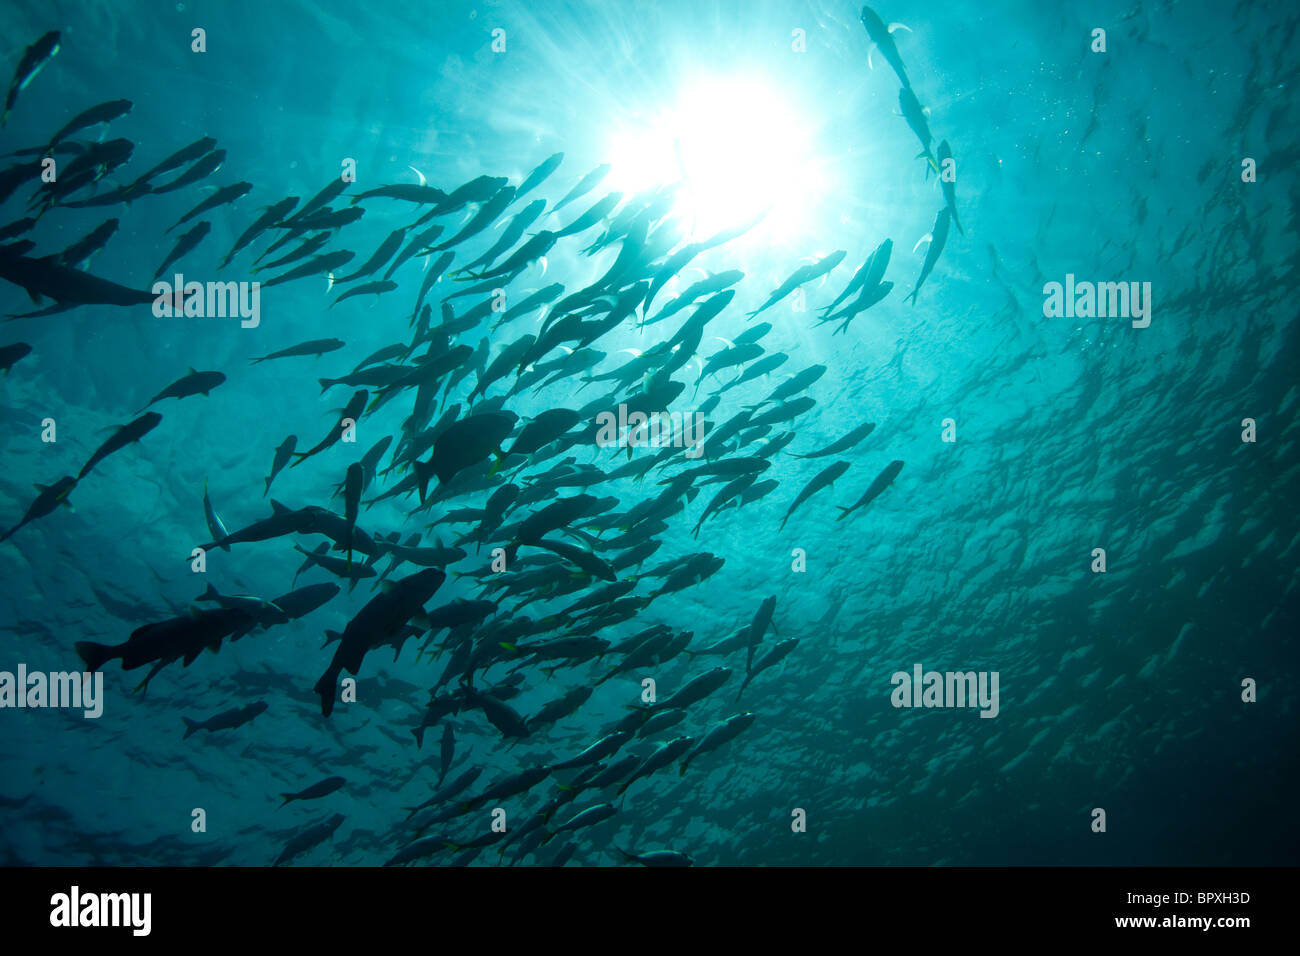 School of fish silhouetted by the sun Stock Photo